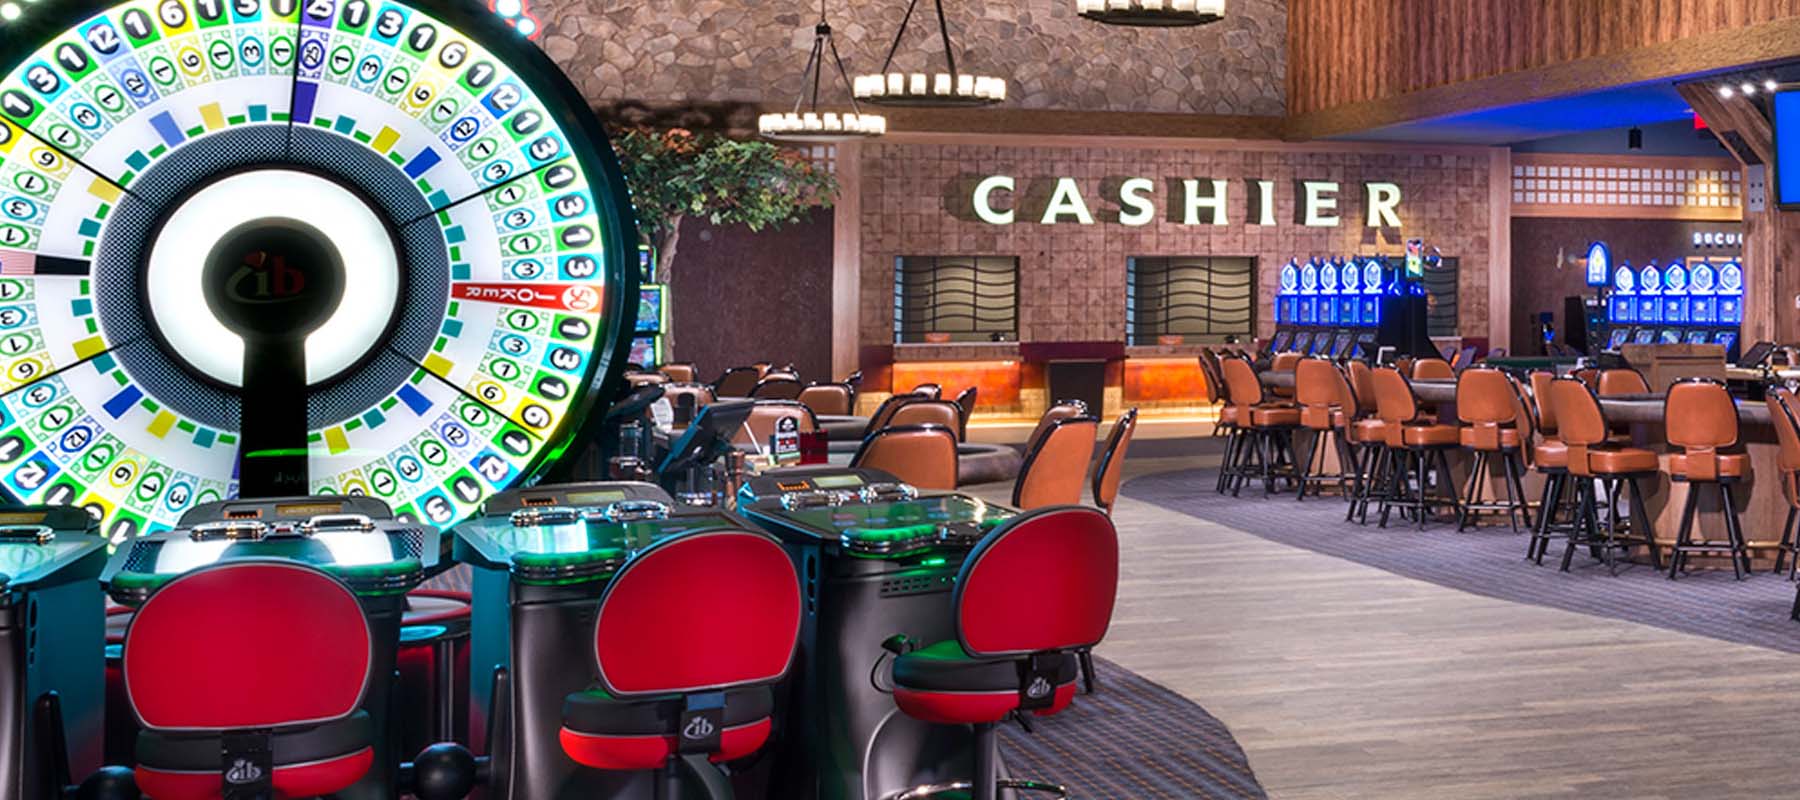 roulette wheel with cashier booth in the distance